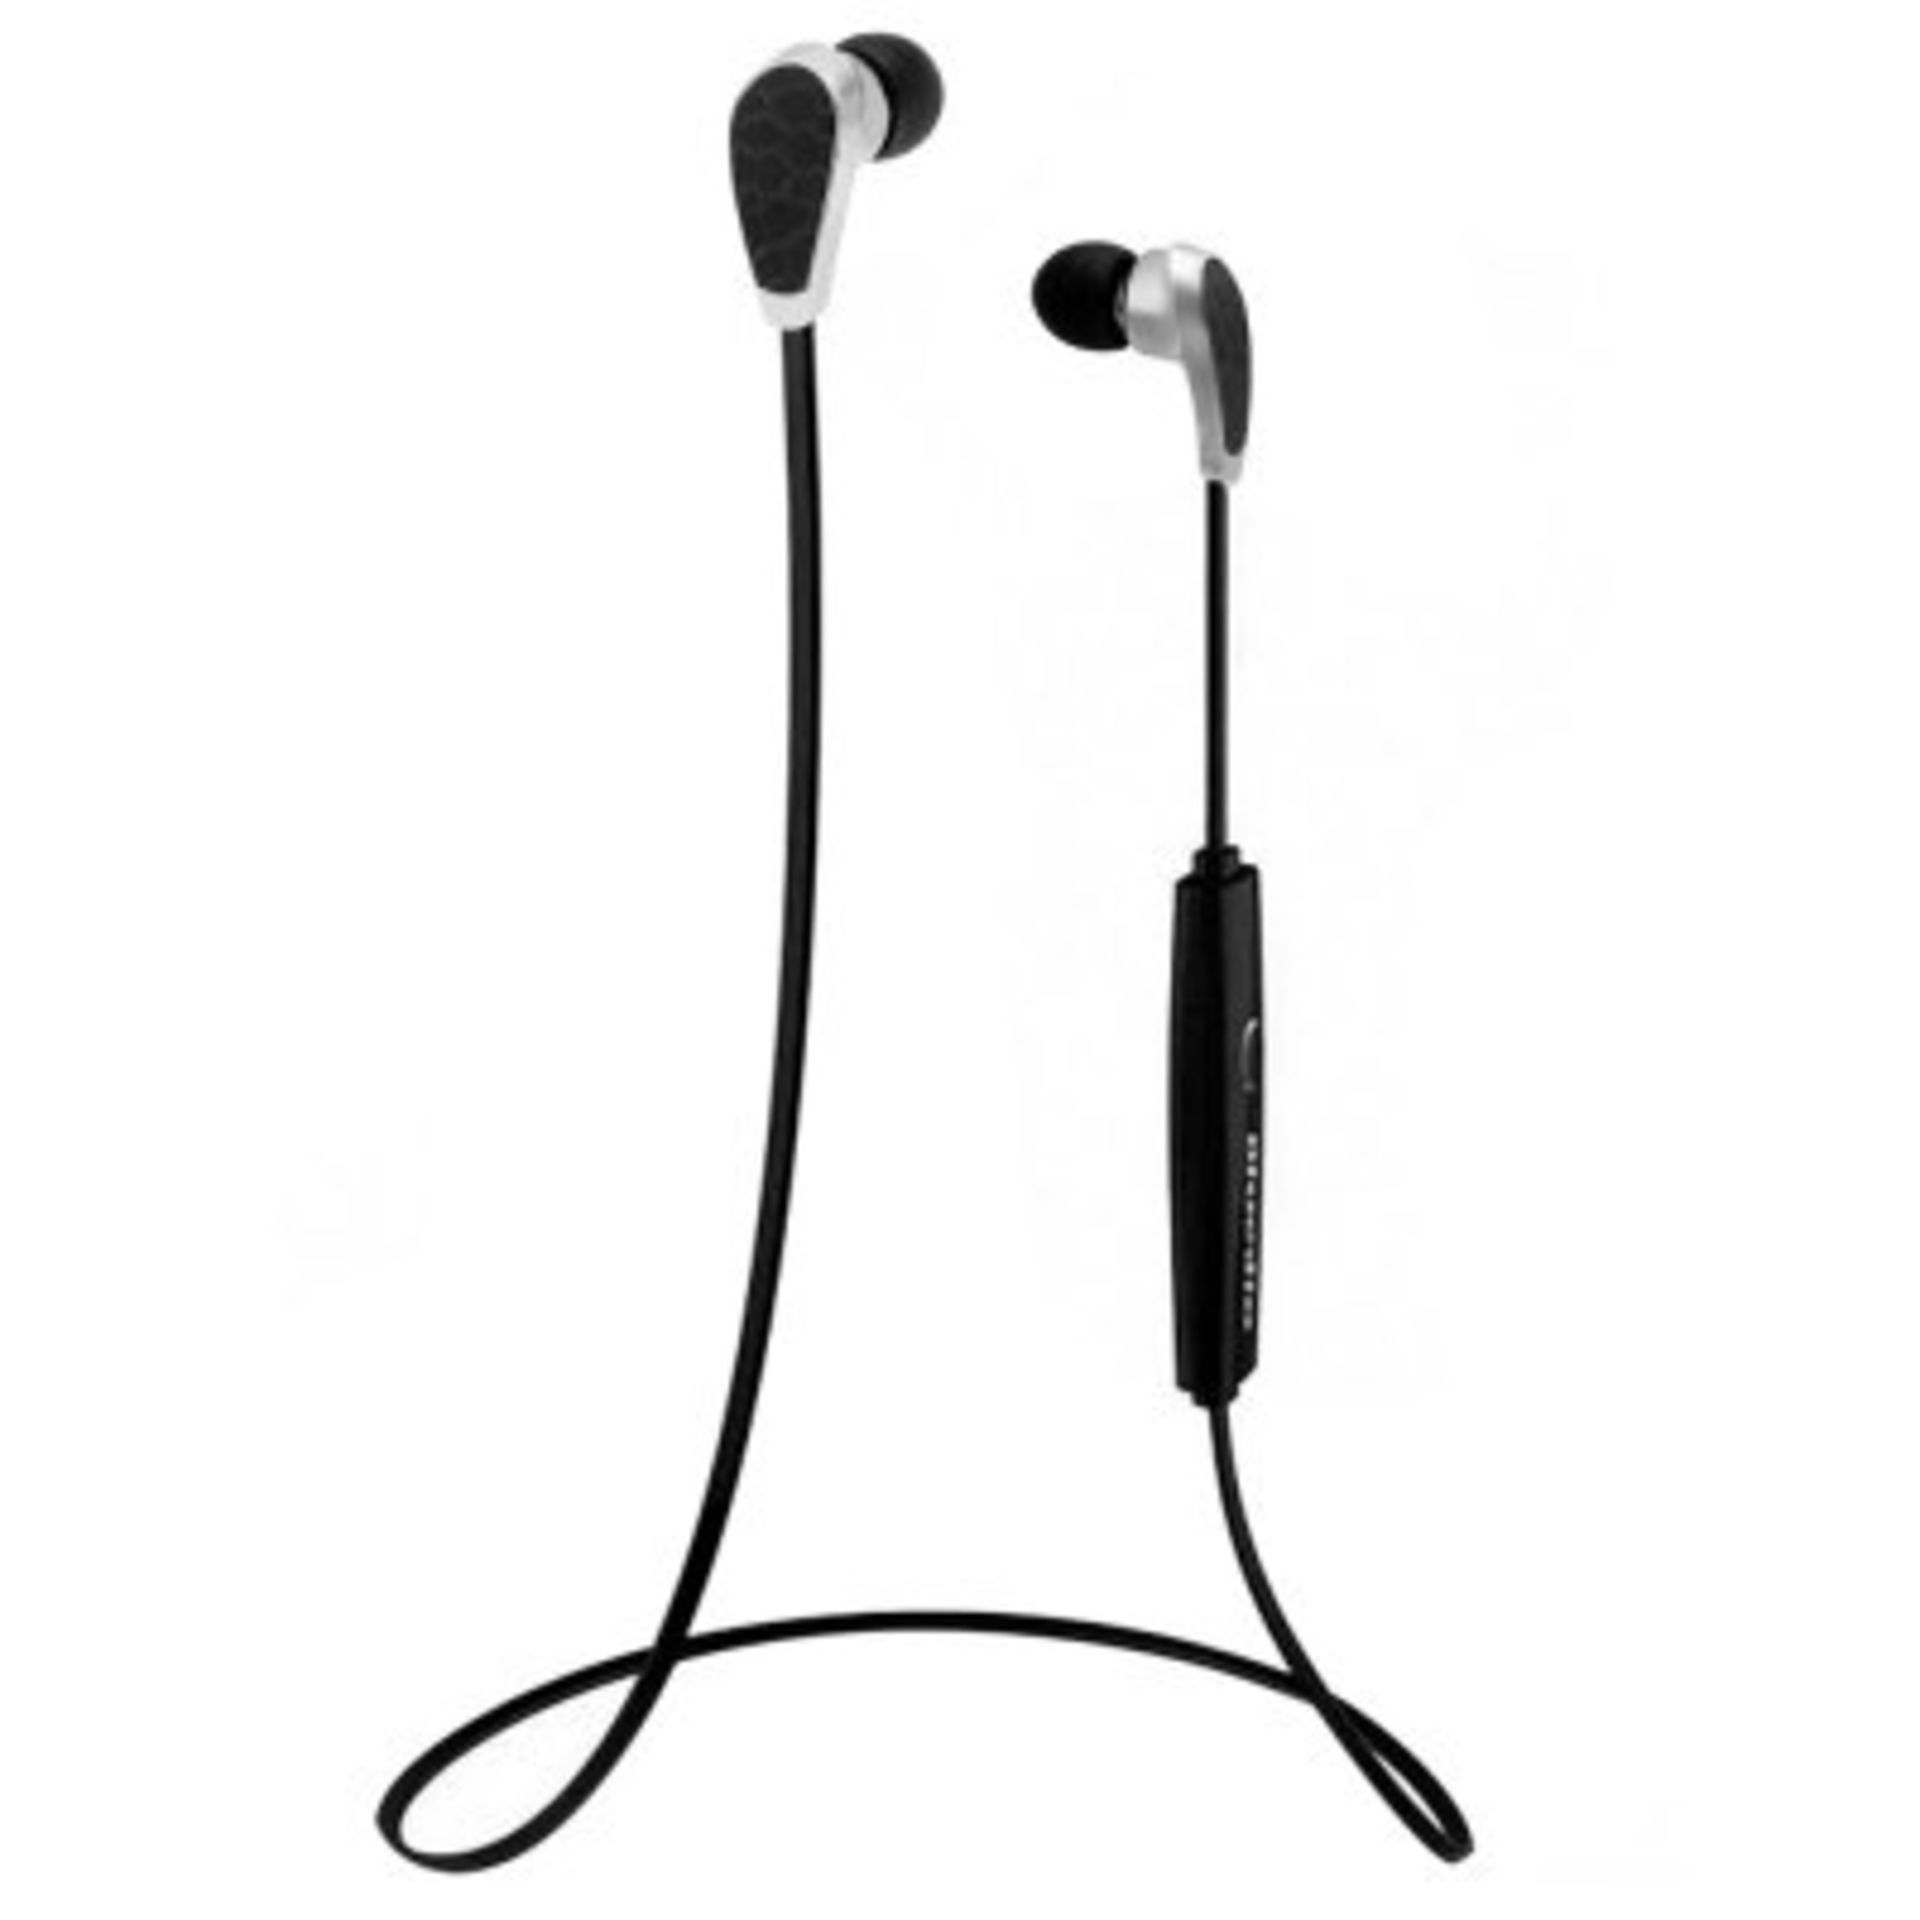 V Brand New Pair of Bluetooth Earphones/Headset (All Boxed) - Colours and Styles/Makes May Vary - - Bild 5 aus 7